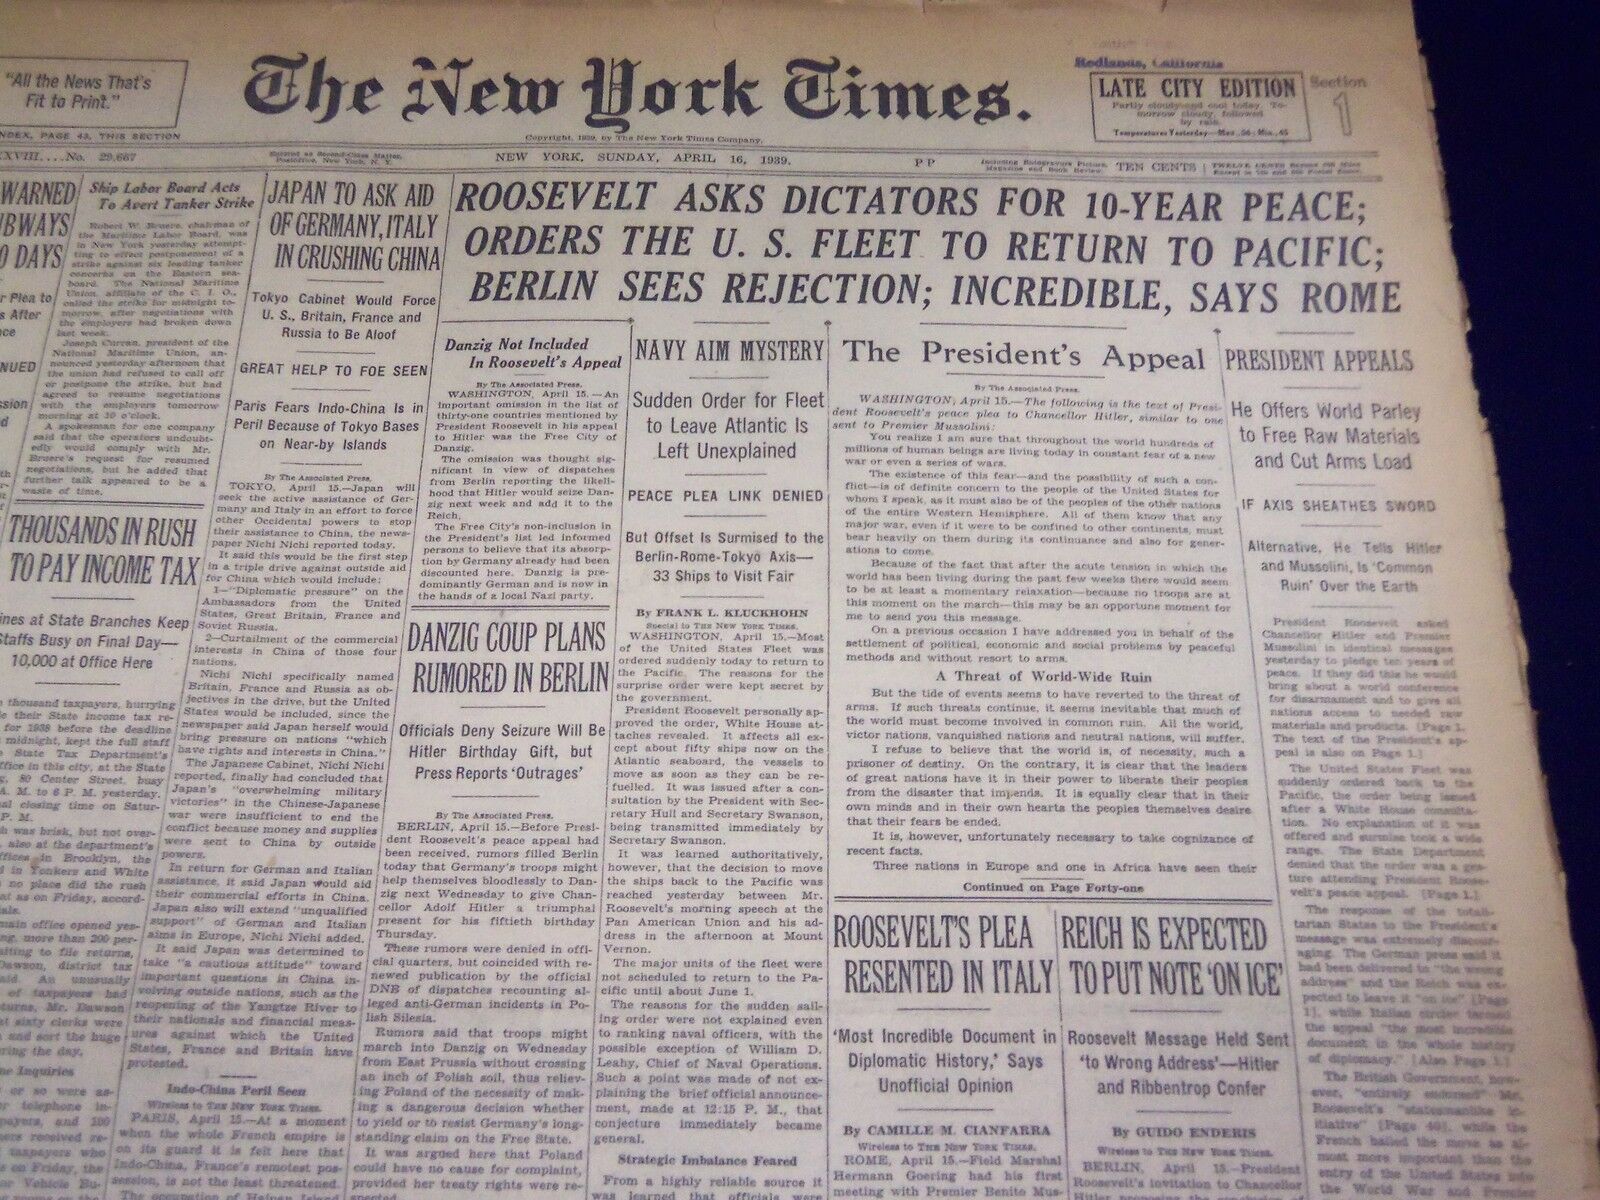 1939 APRIL 16 NEW YORK TIMES - ROOSEVELT ASKS DICTATORS FOR PEACE - NT 3079